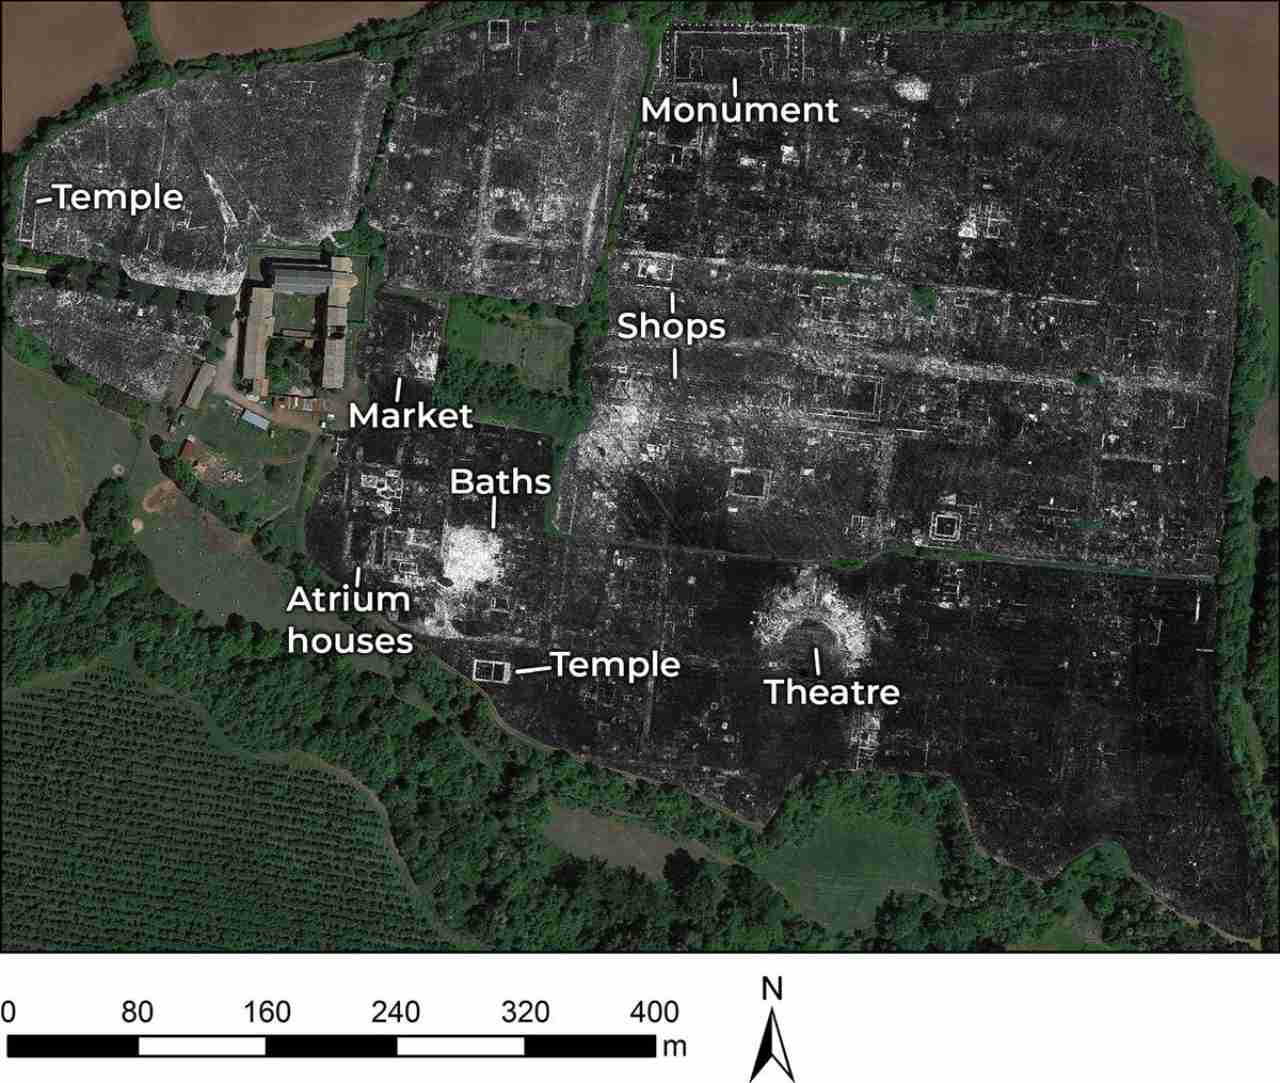 Wider layout of features in Falerii Novi, Italy mapped using GPR data, captured on 8 May 2020. Image: L Verdonck via Reuters